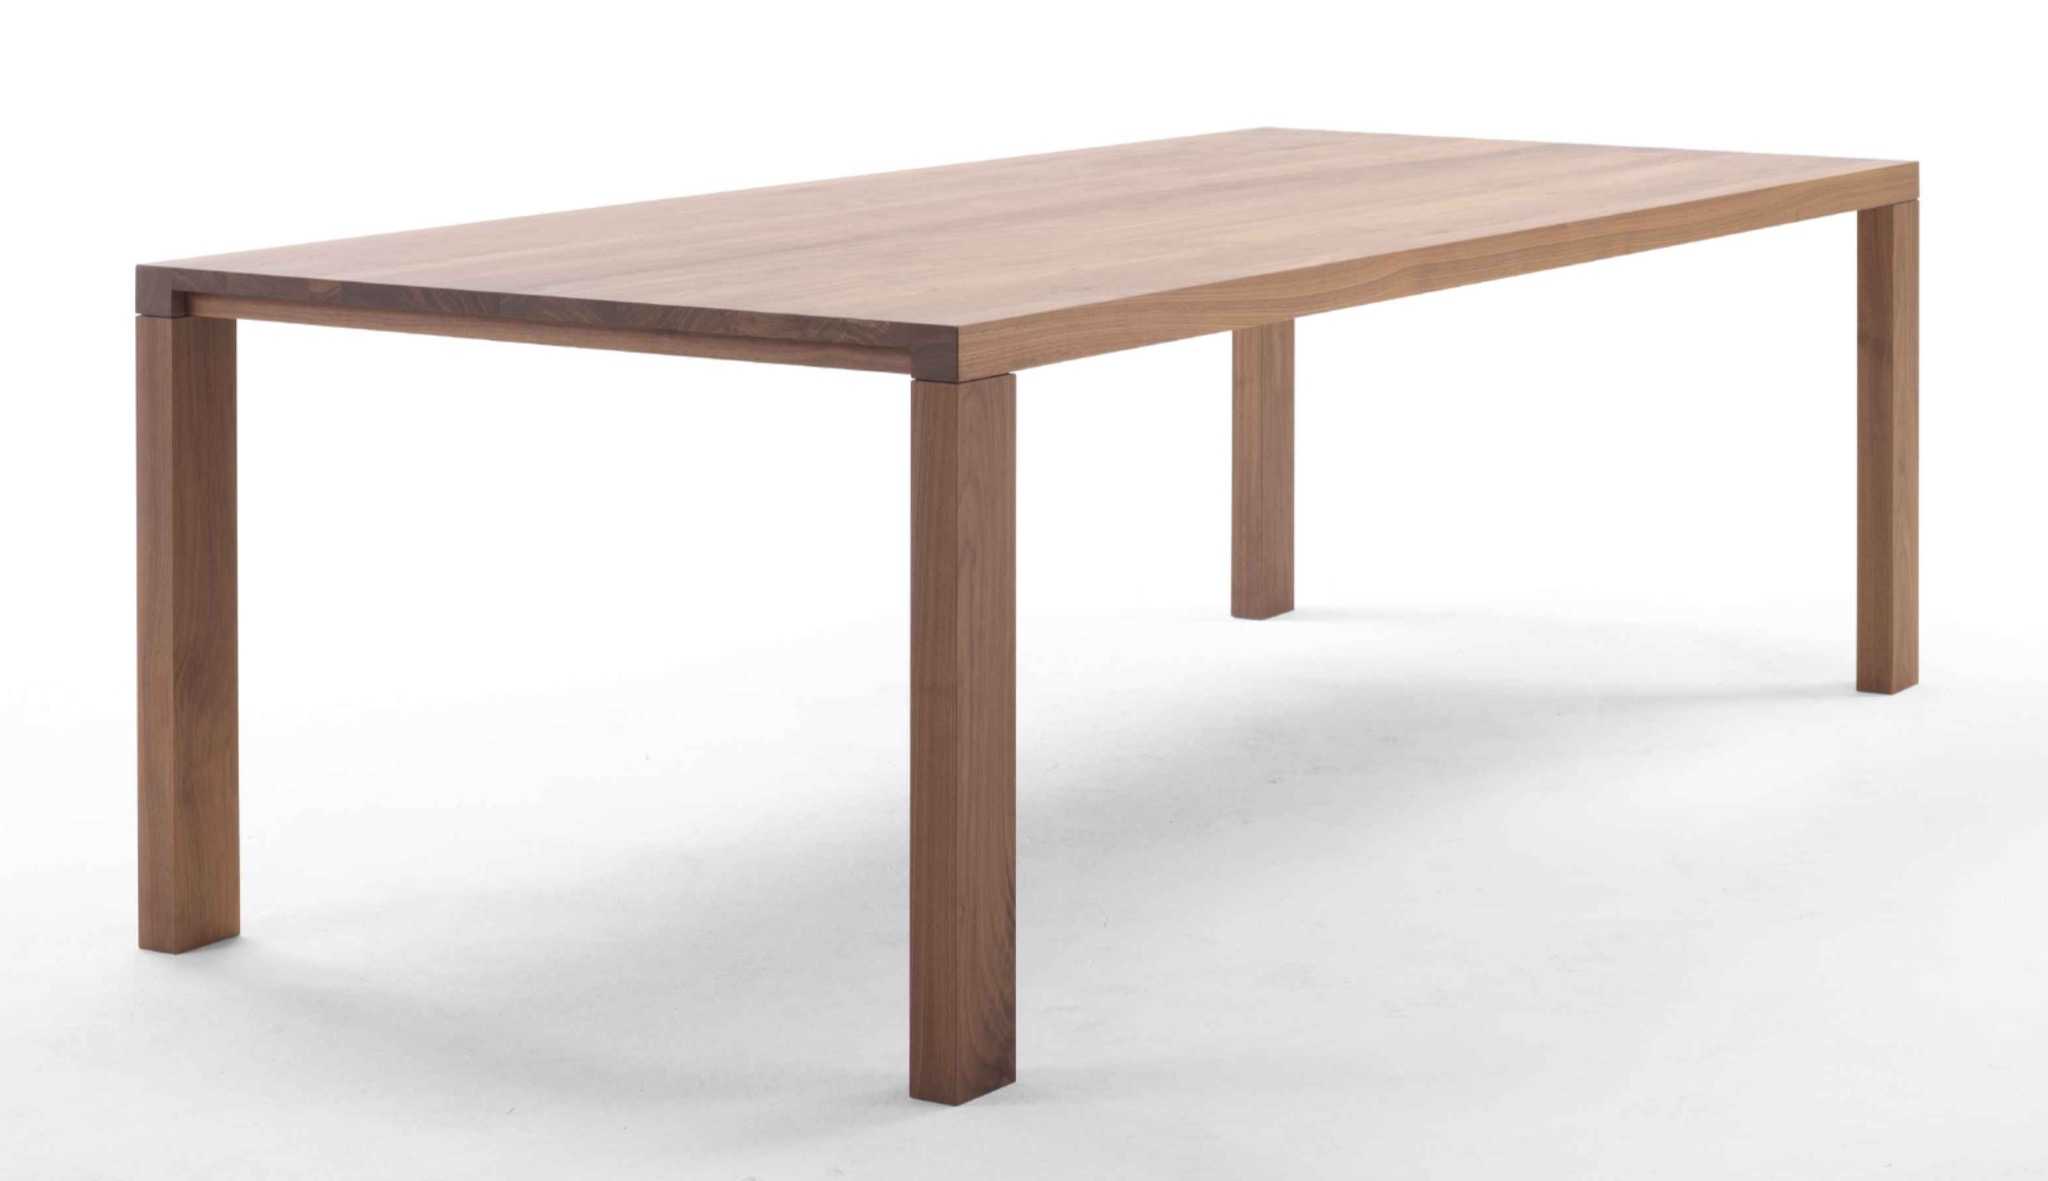 Apple Campus 2 table